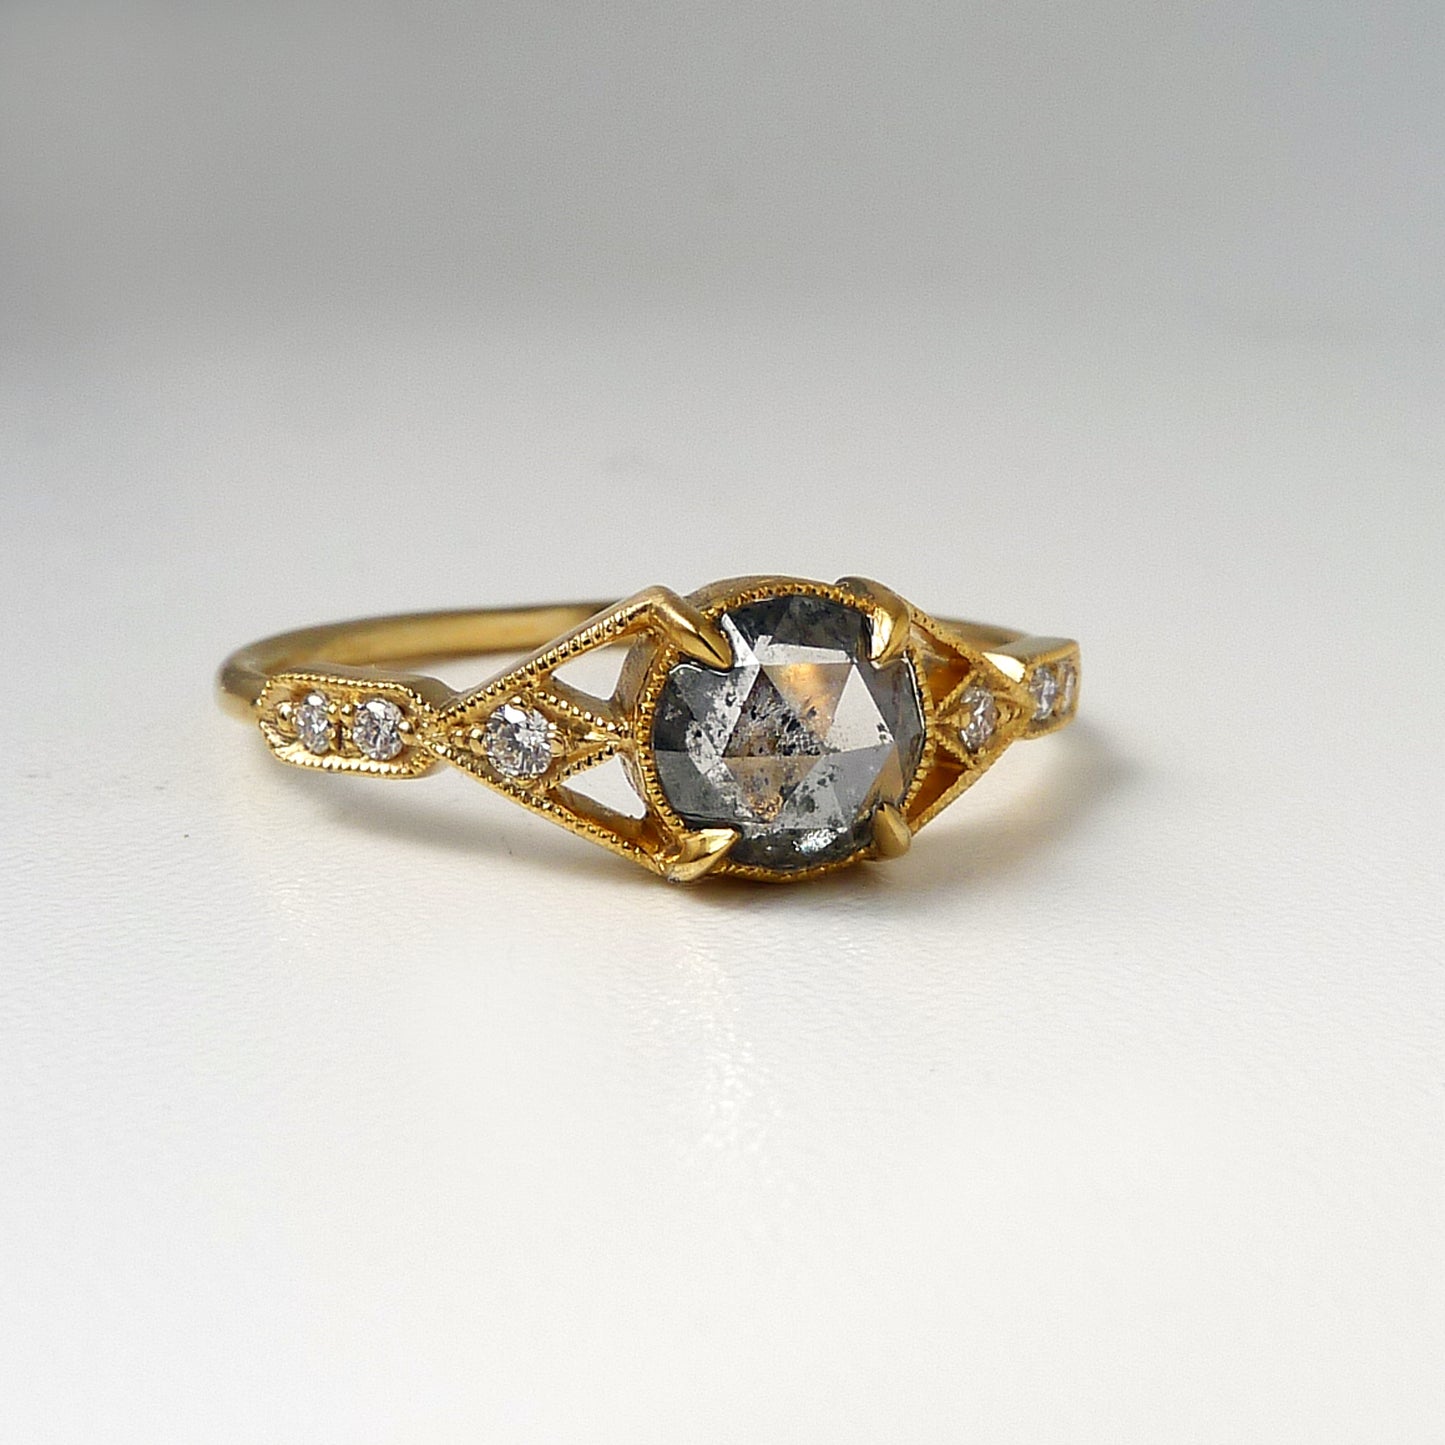 Aestas Ring with Salt and Pepper Diamond